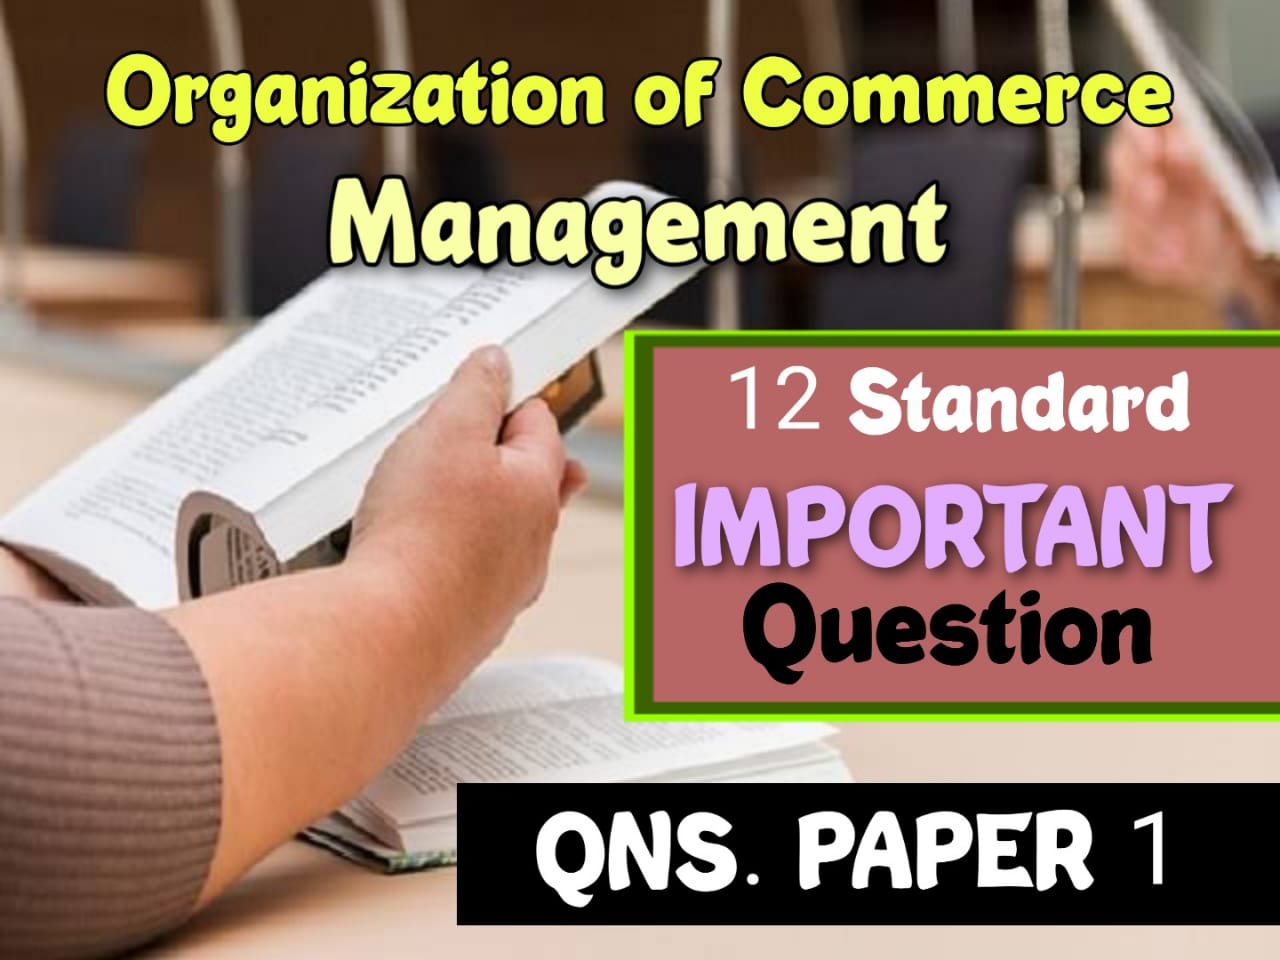 Organization of commerce and management important question